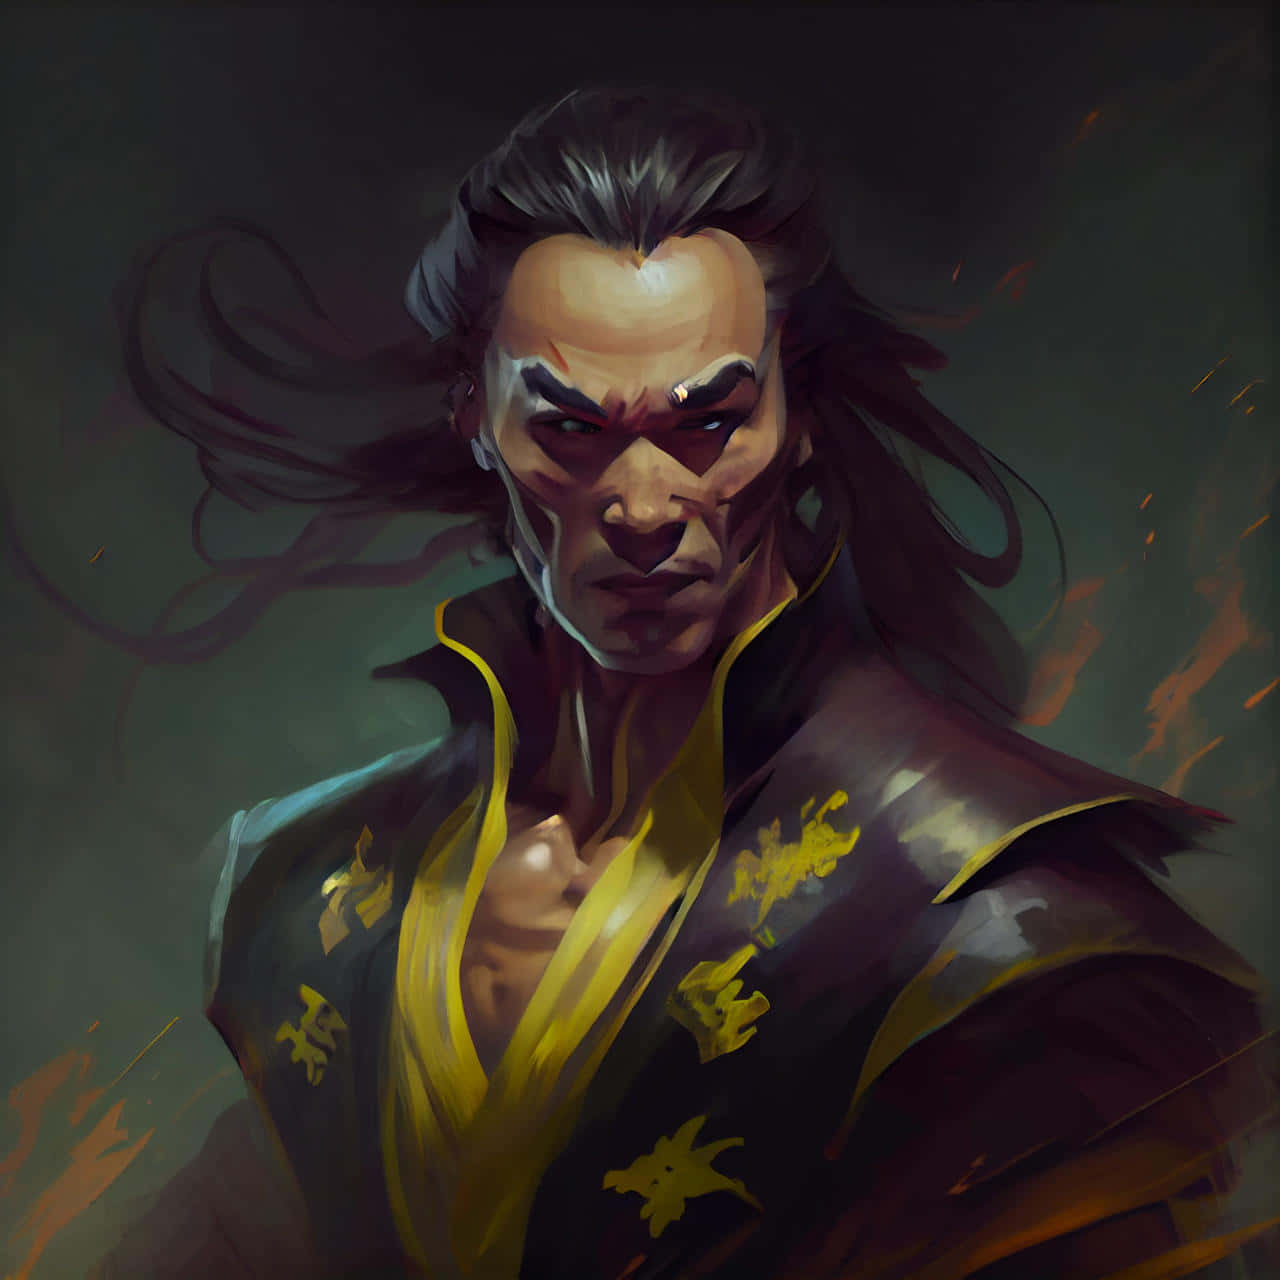 The Fearsome Shang Tsung Unleashes His Powers in Mortal Kombat Wallpaper